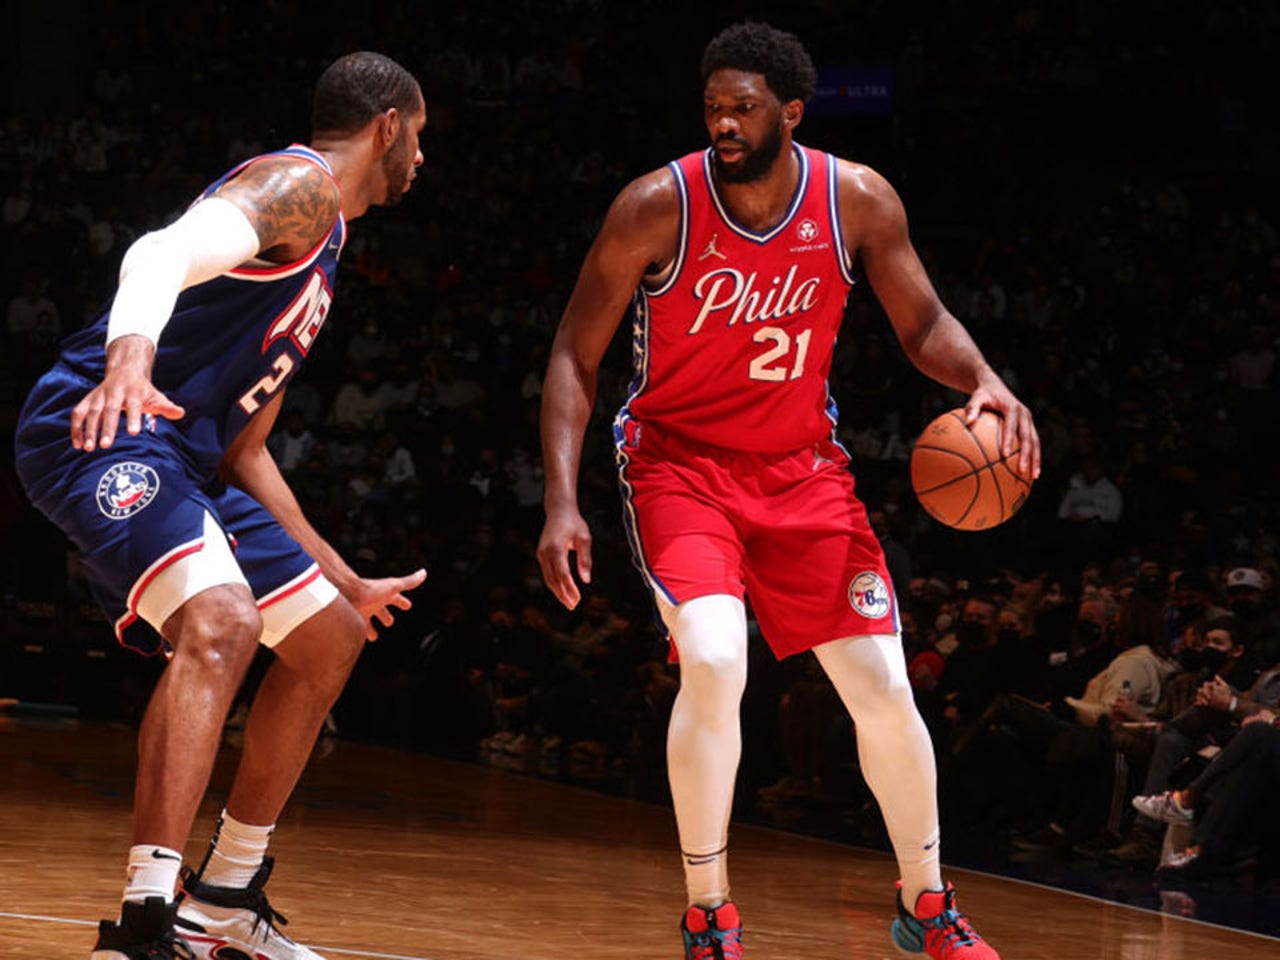 Lewis' big night sparks Wizards to rout over Nets - The San Diego